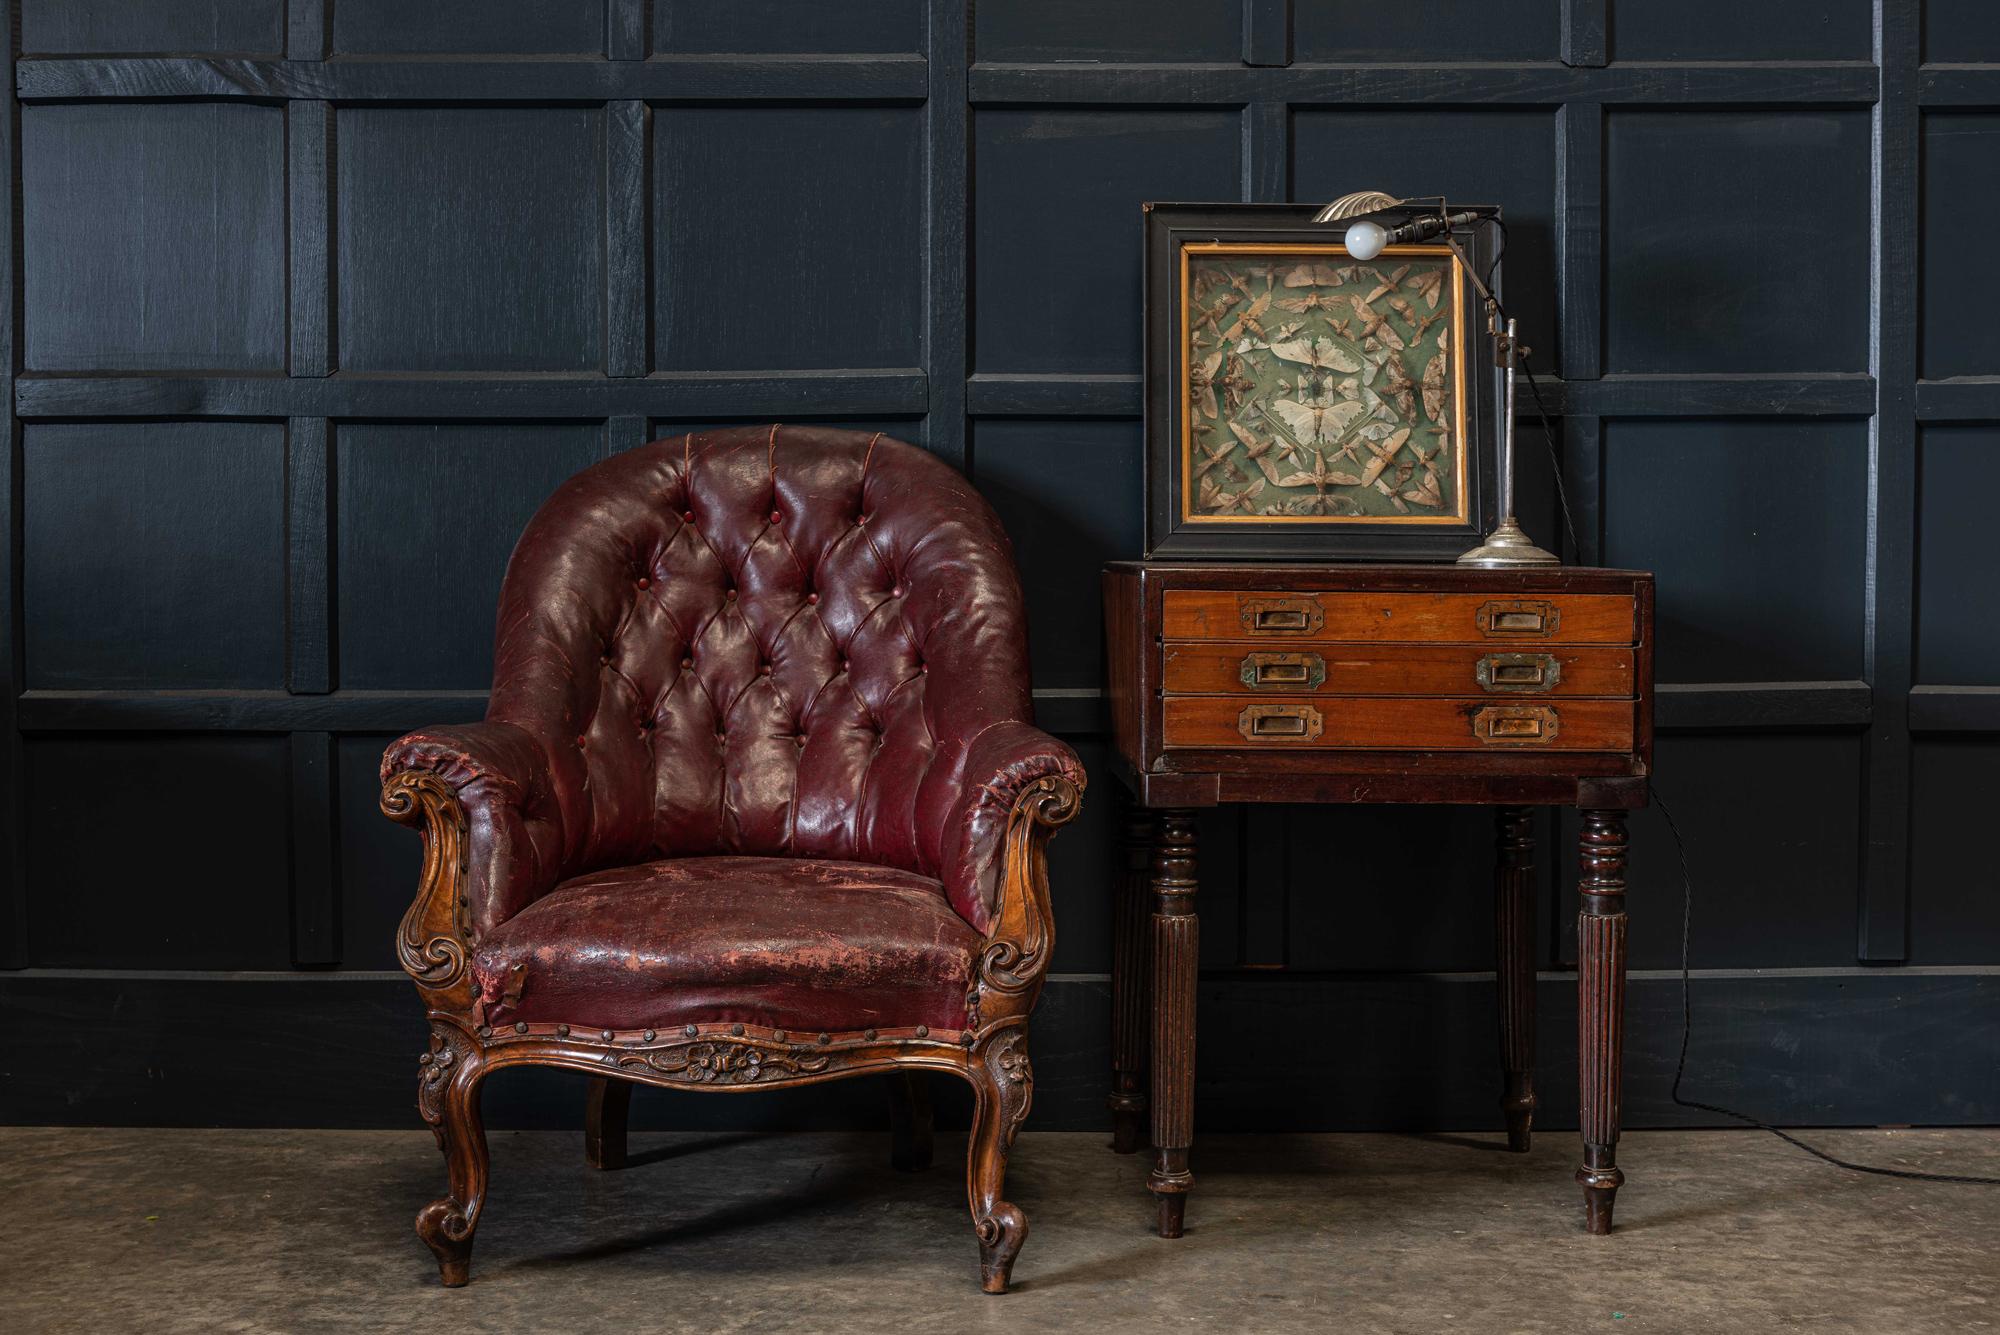 19th century English walnut buttoned library armchair
circa 1870.

With original maroon leather cloth upholstery with old cloth tape patches which improves the character and story.

Measures: H 91 x W 75 x D 80cm
Seat height 40cm.